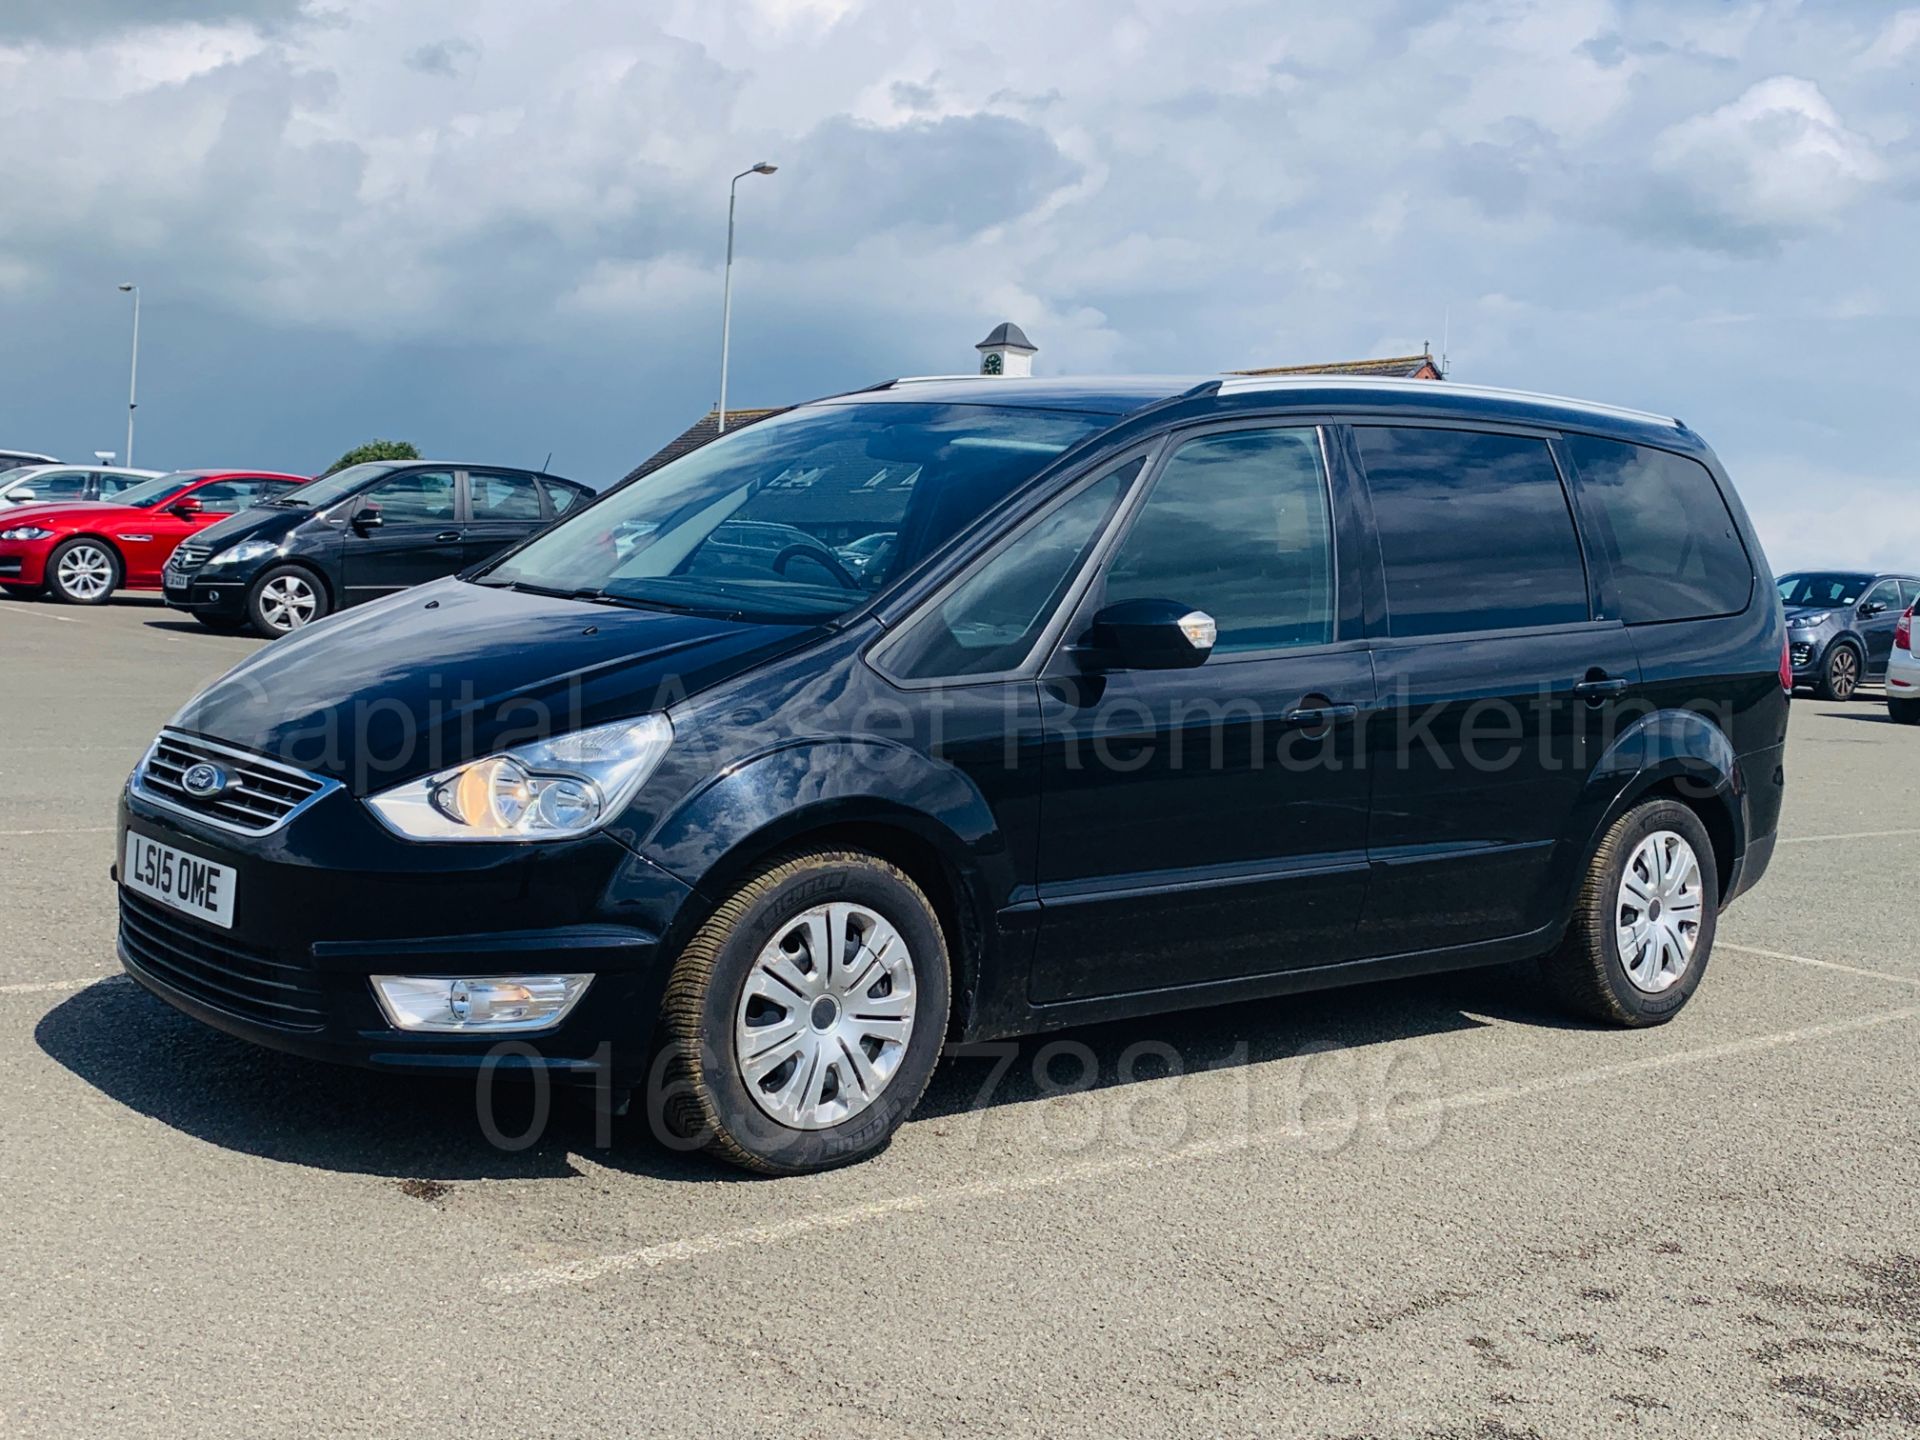 (On Sale) FORD GALAXY *ZETEC* 7 SEATER MPV (2015) '2.0 TDCI - 140 BHP - POWER SHIFT' (1 OWNER) - Image 3 of 37